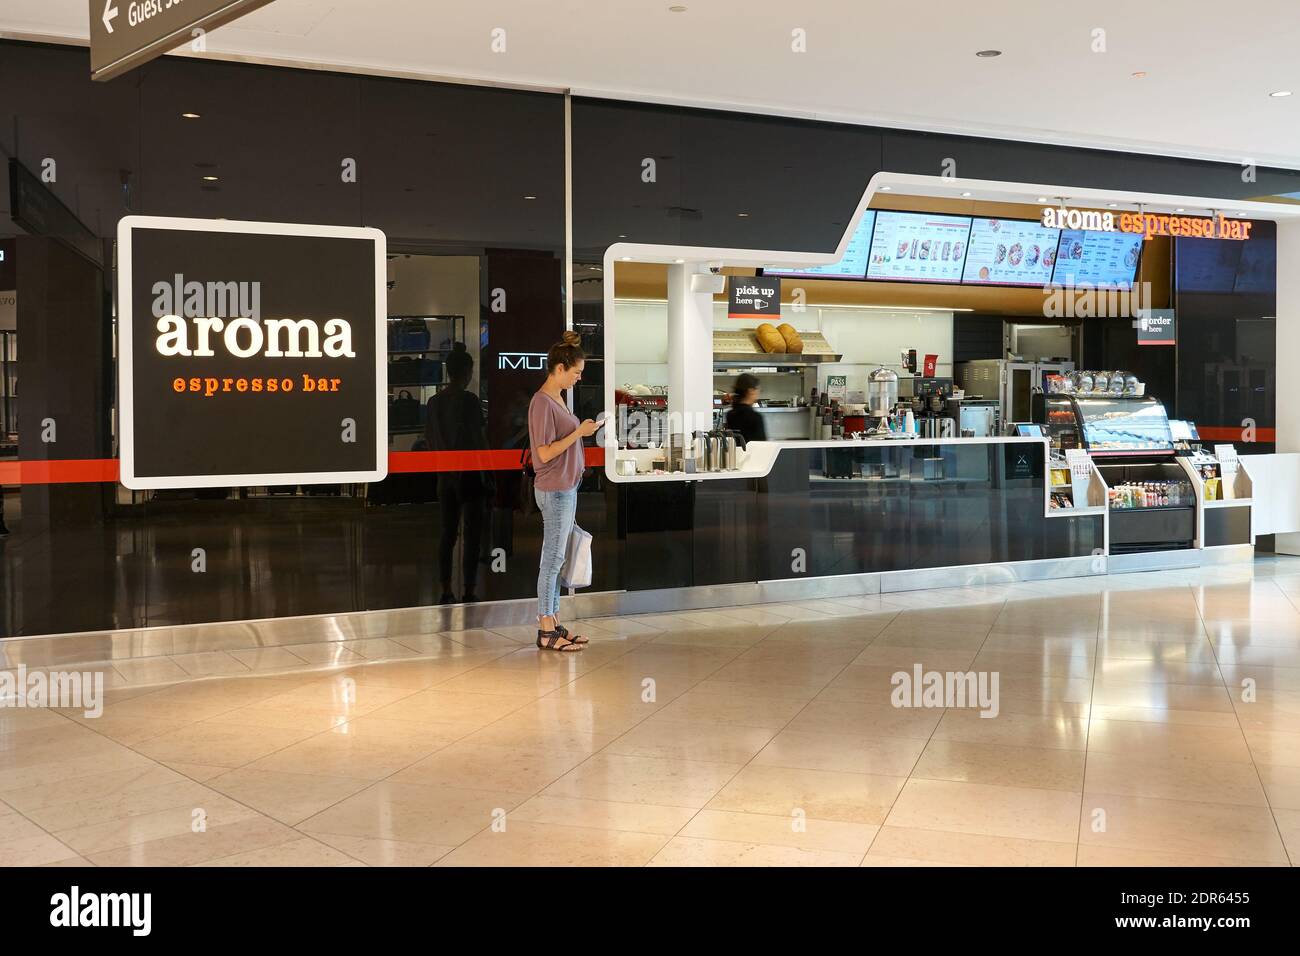 Toronto, Canada - August 26, 2019: People at Aroma Espresso Bar. Aroma Espresso Bar is an Israeli espresso and coffee chain with 125 branches around I Stock Photo